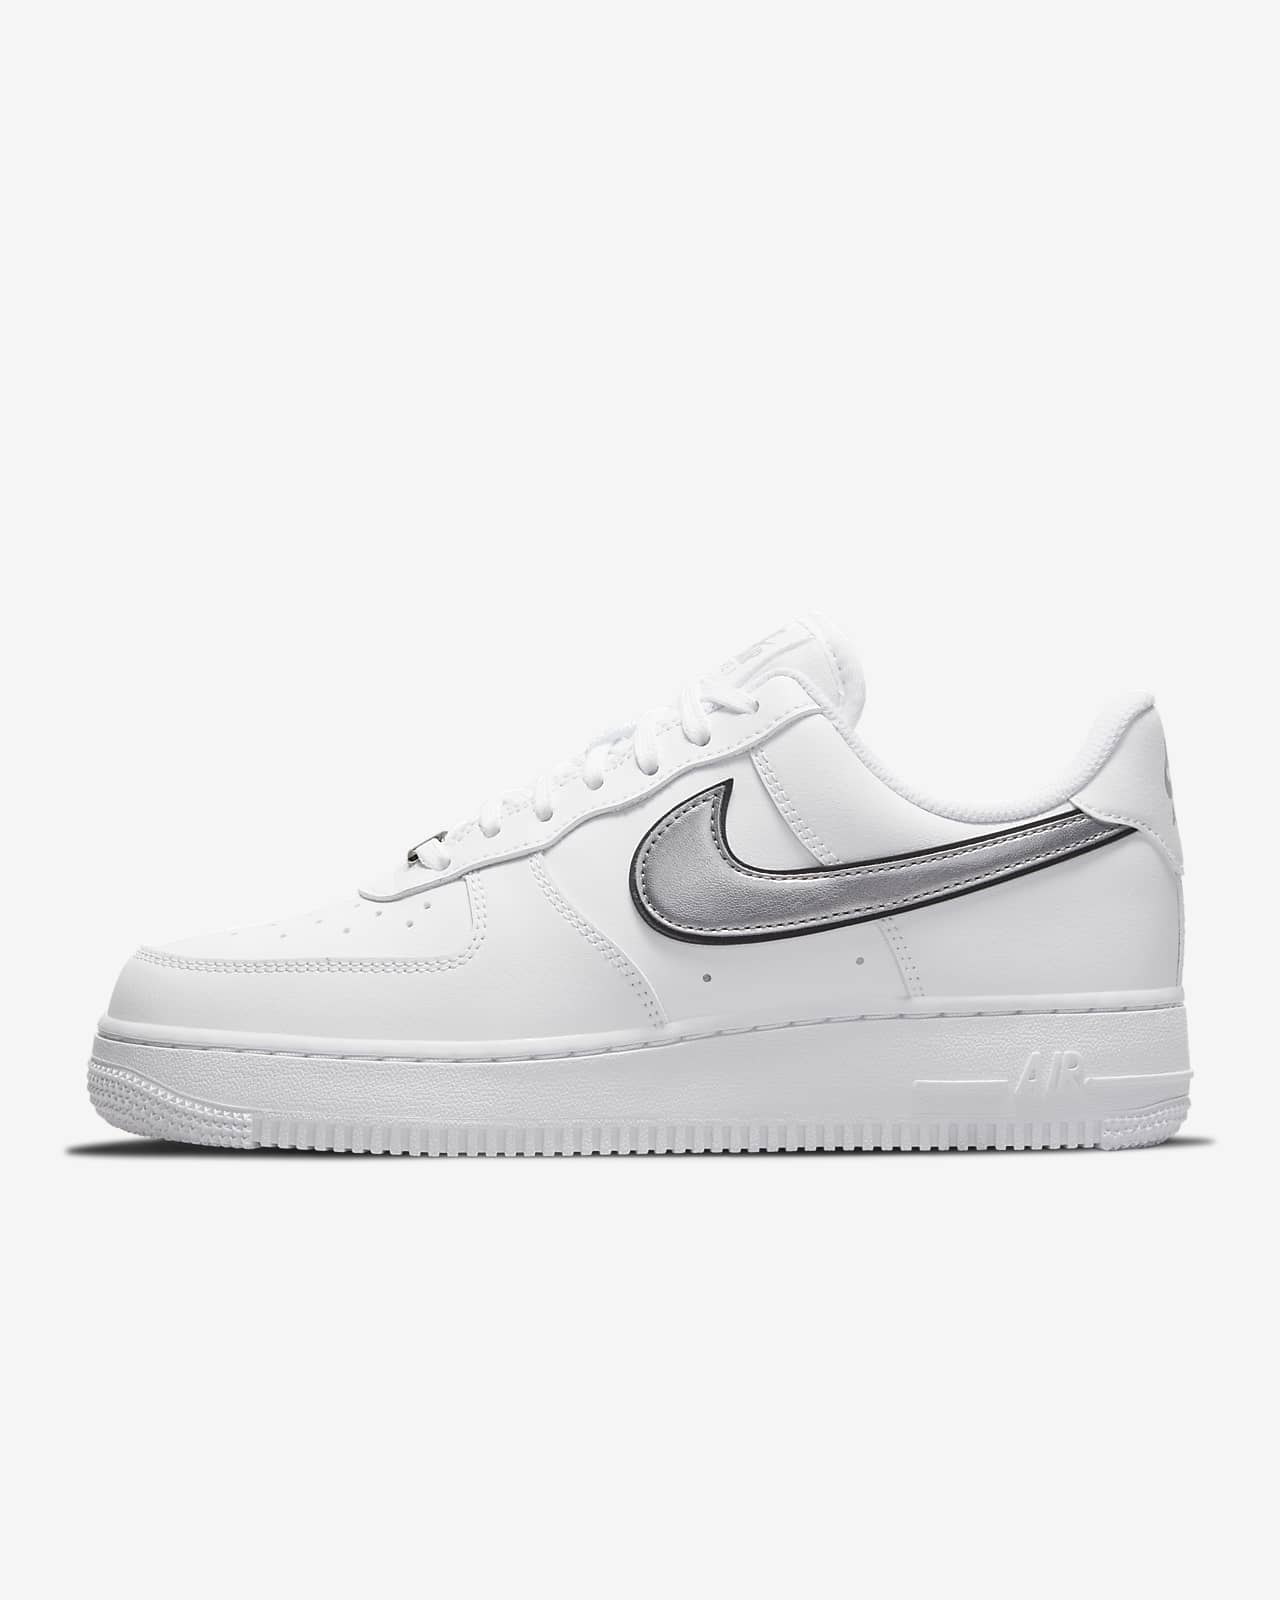 Chaussures Nike Air Force 1 '07 Essential pour Femme